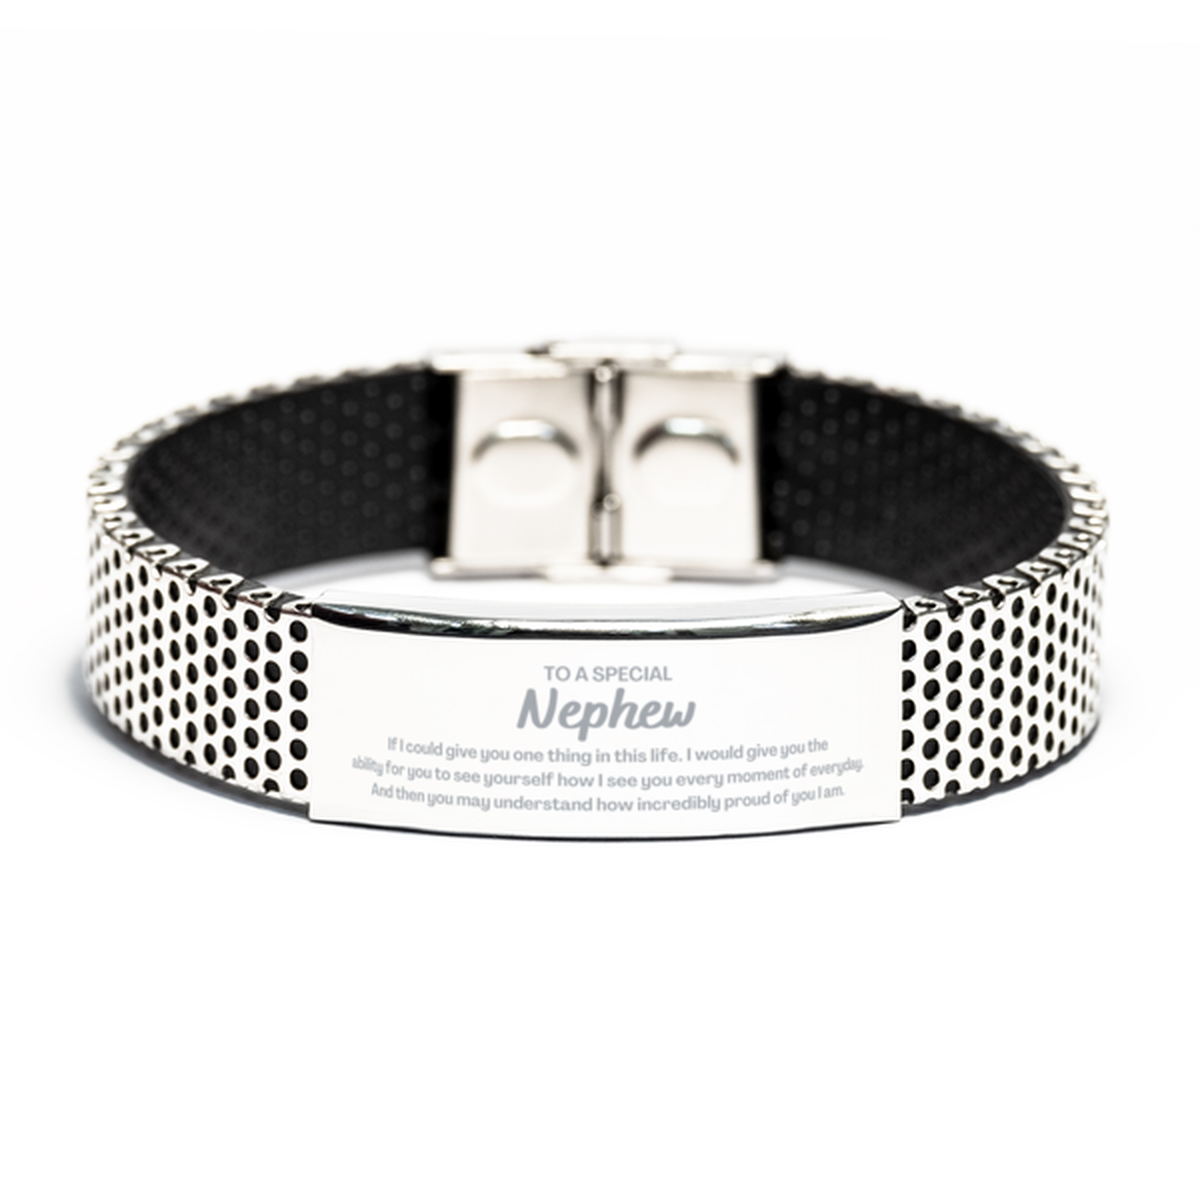 To My Nephew Stainless Steel Bracelet, Gifts For Nephew Engraved, Inspirational Gifts for Christmas Birthday, Epic Gifts for Nephew To A Special Nephew how incredibly proud of you I am